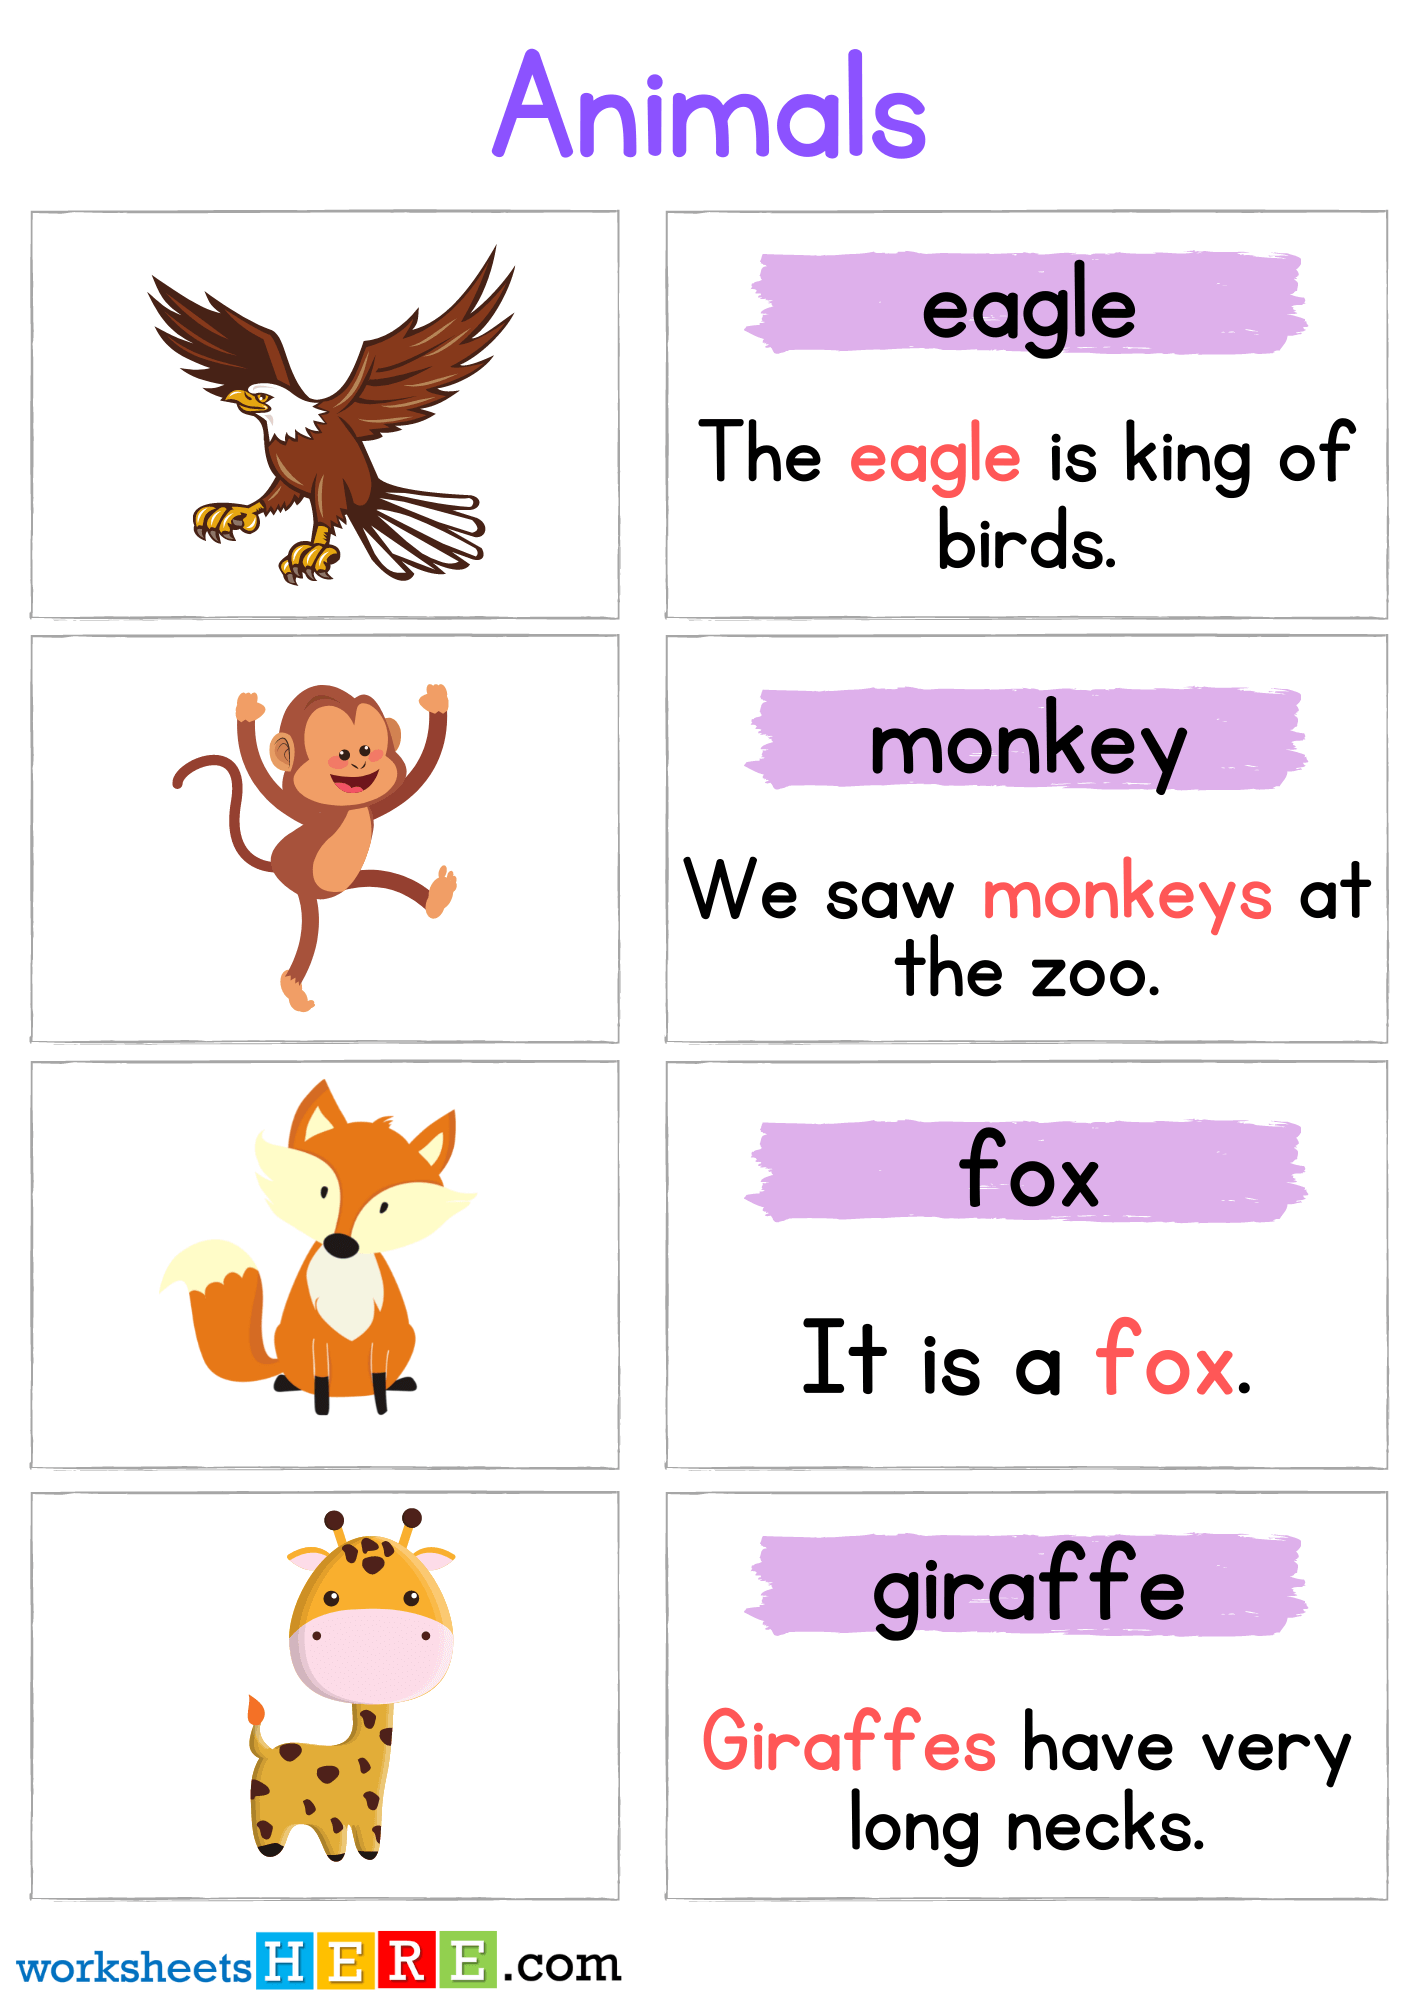 Animals Flashcards Pictures with Sentences Pdf Worksheets For Kids, Eagle, Monkey, Fox, Giraffe